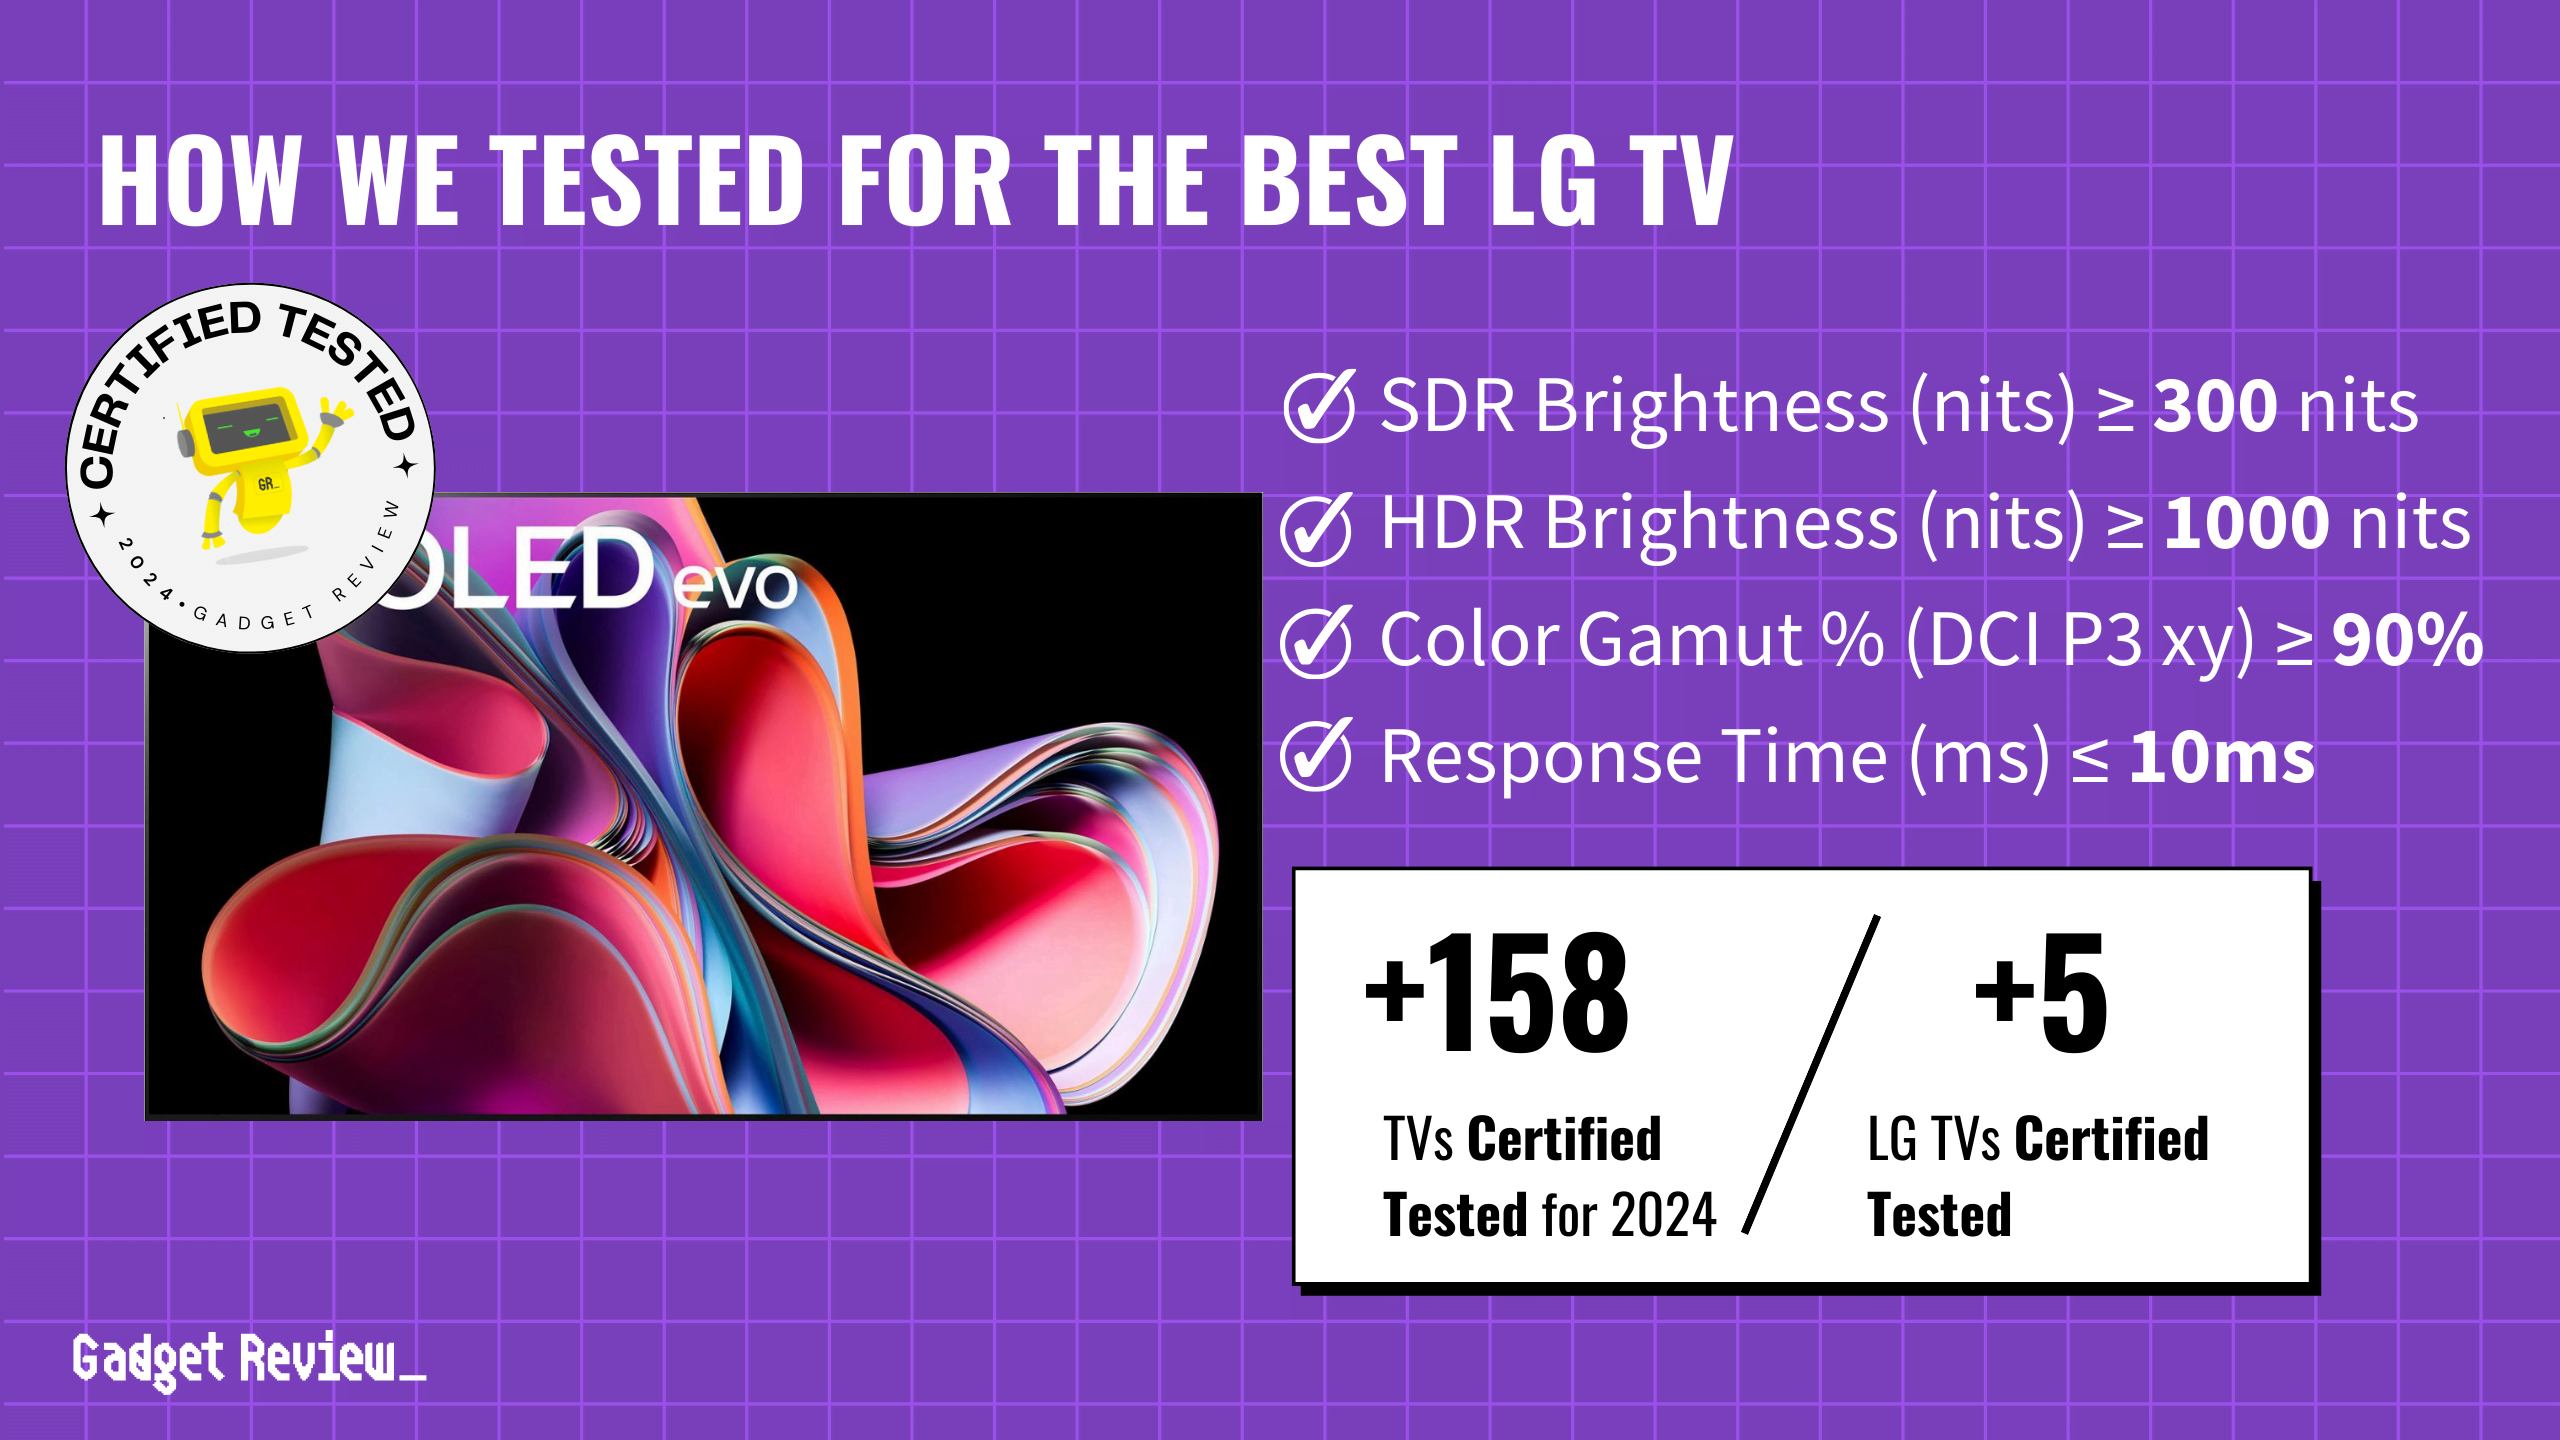 How We Ranked The 4 Best LG TVs